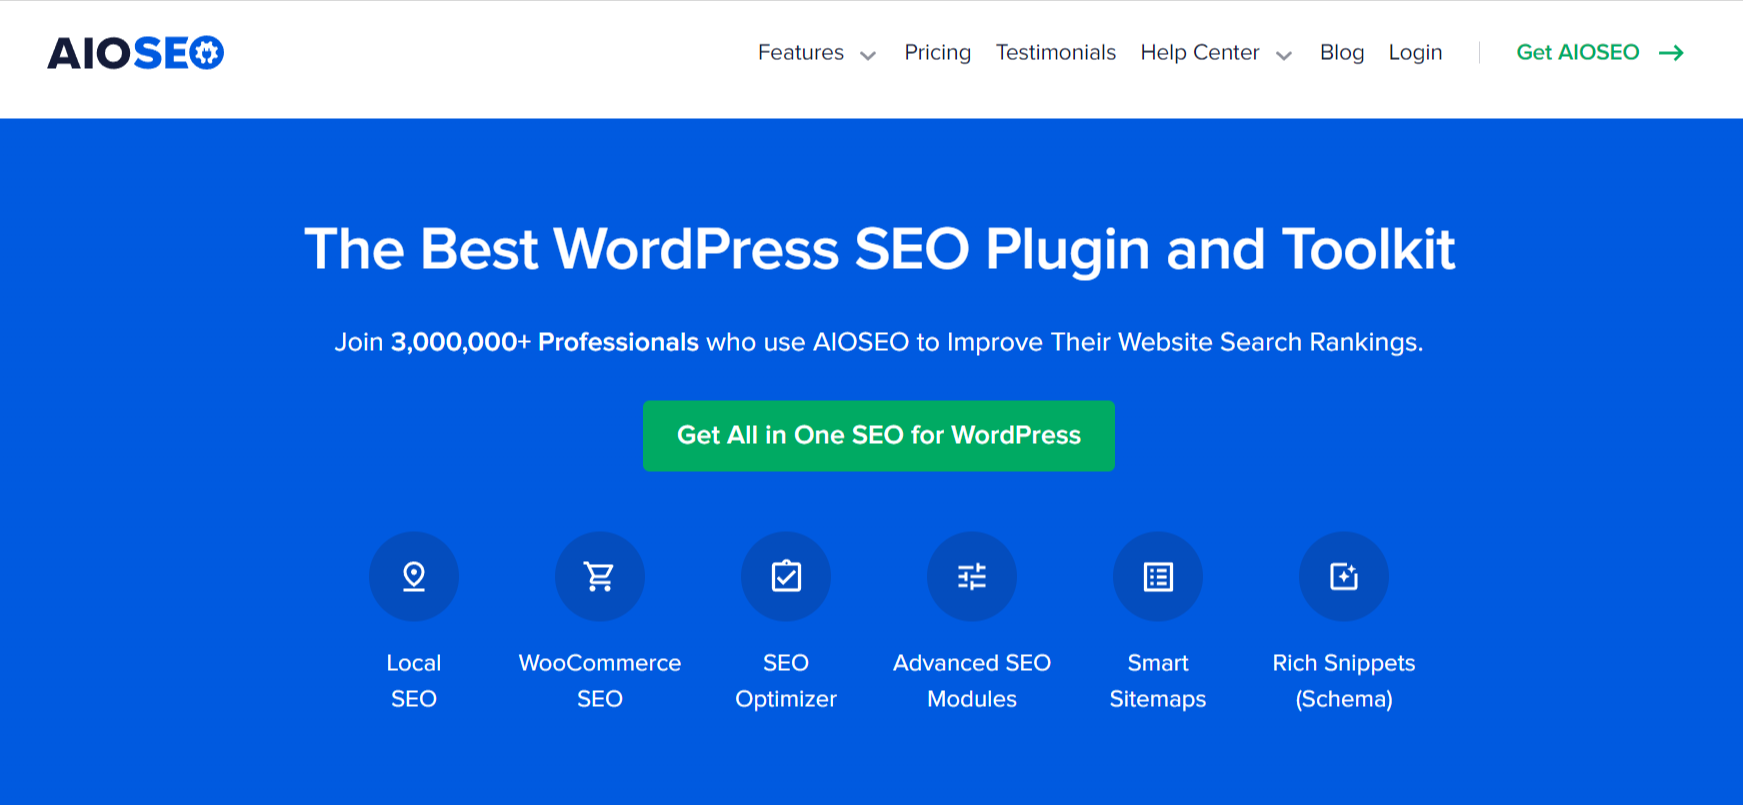 All in One SEO - Top 5 WooCommerce Plugins of 2022